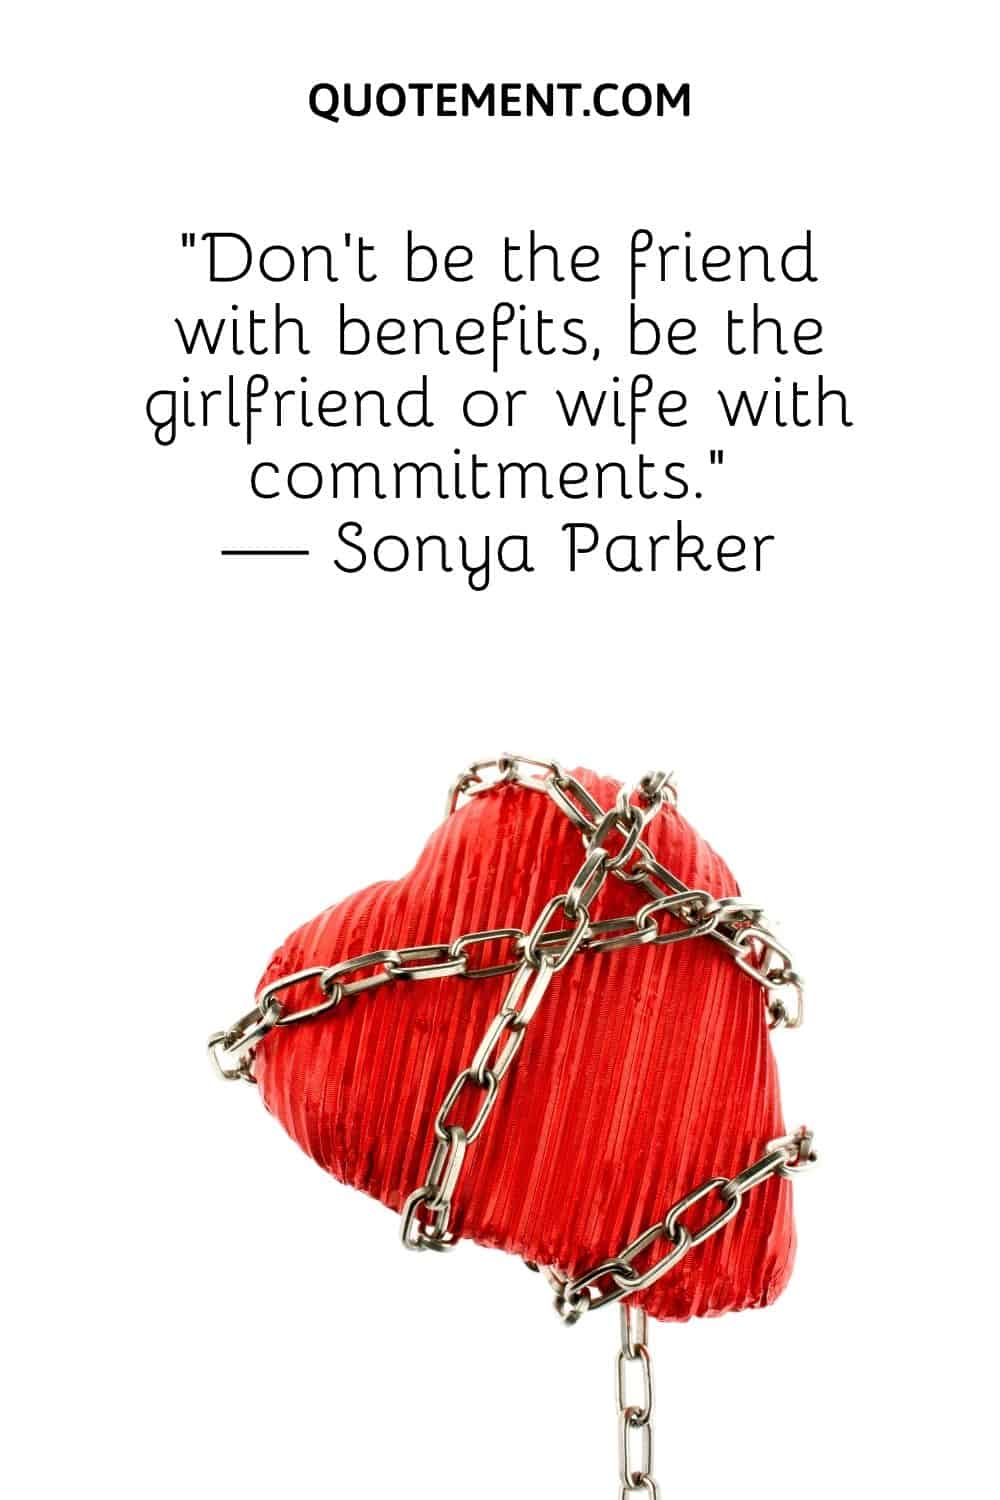 “Don't be the friend with benefits, be the girlfriend or wife with commitments.” — Sonya Parker